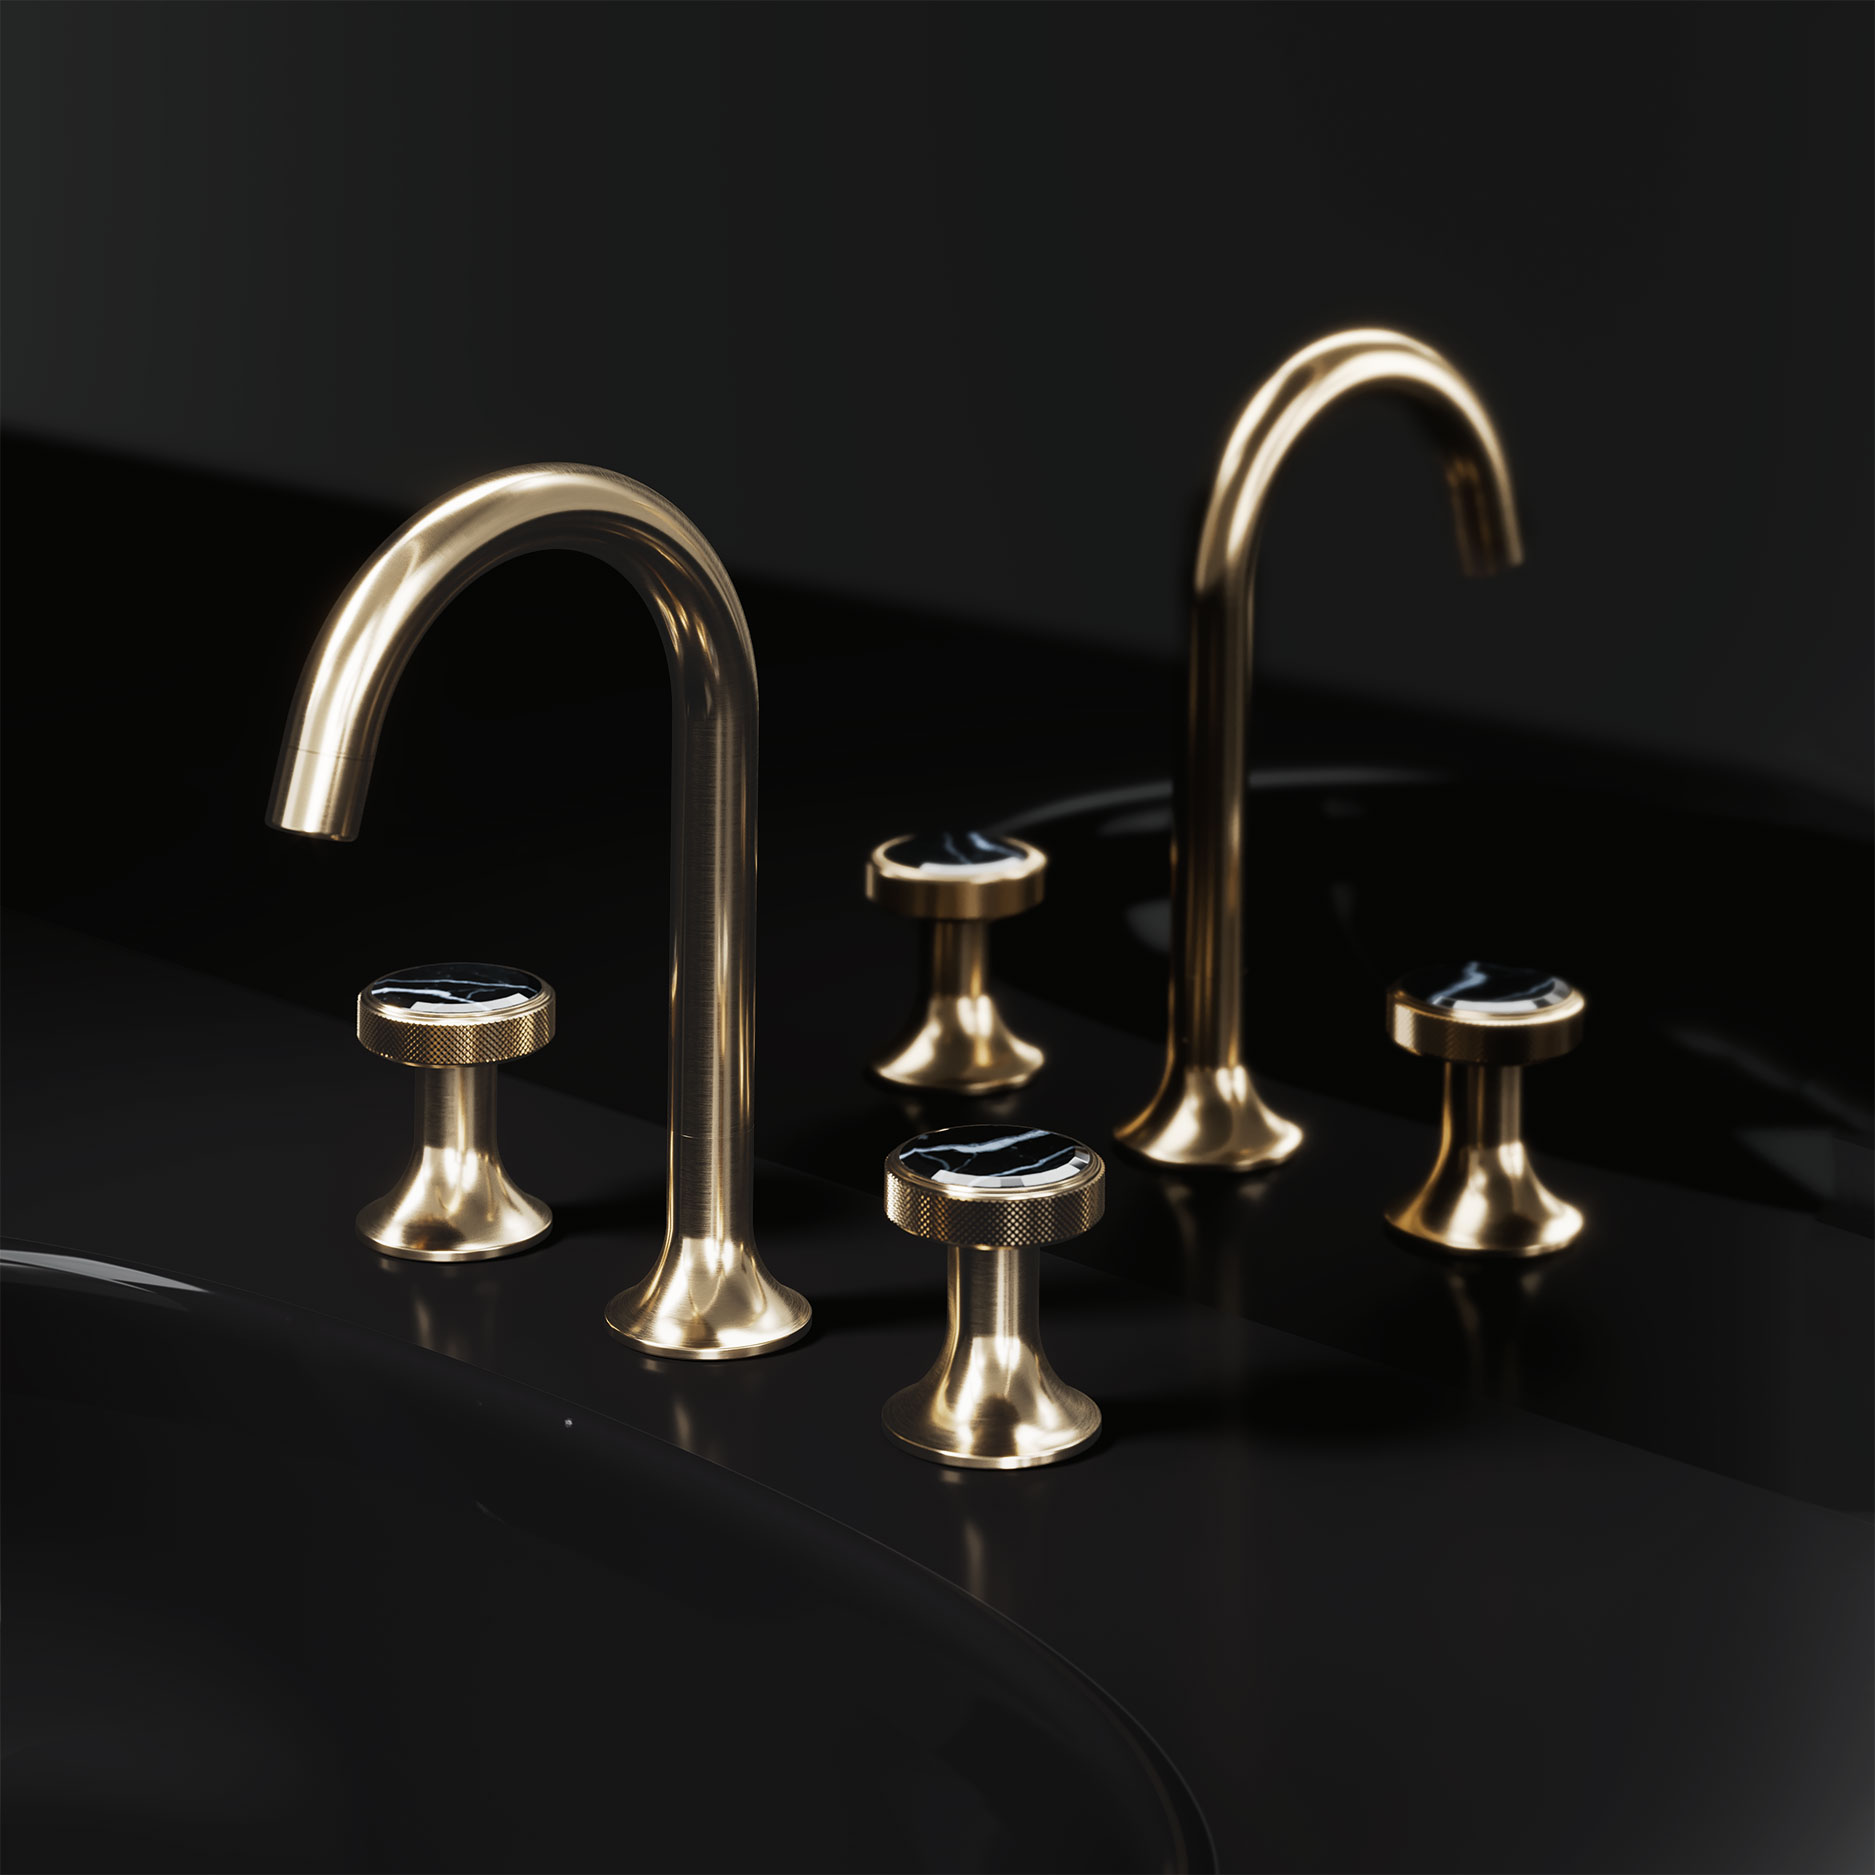 Luxury & Avant-garde – Exquisite shine with glamorous moments - Jörger  Bathroom Fittings and Accessories